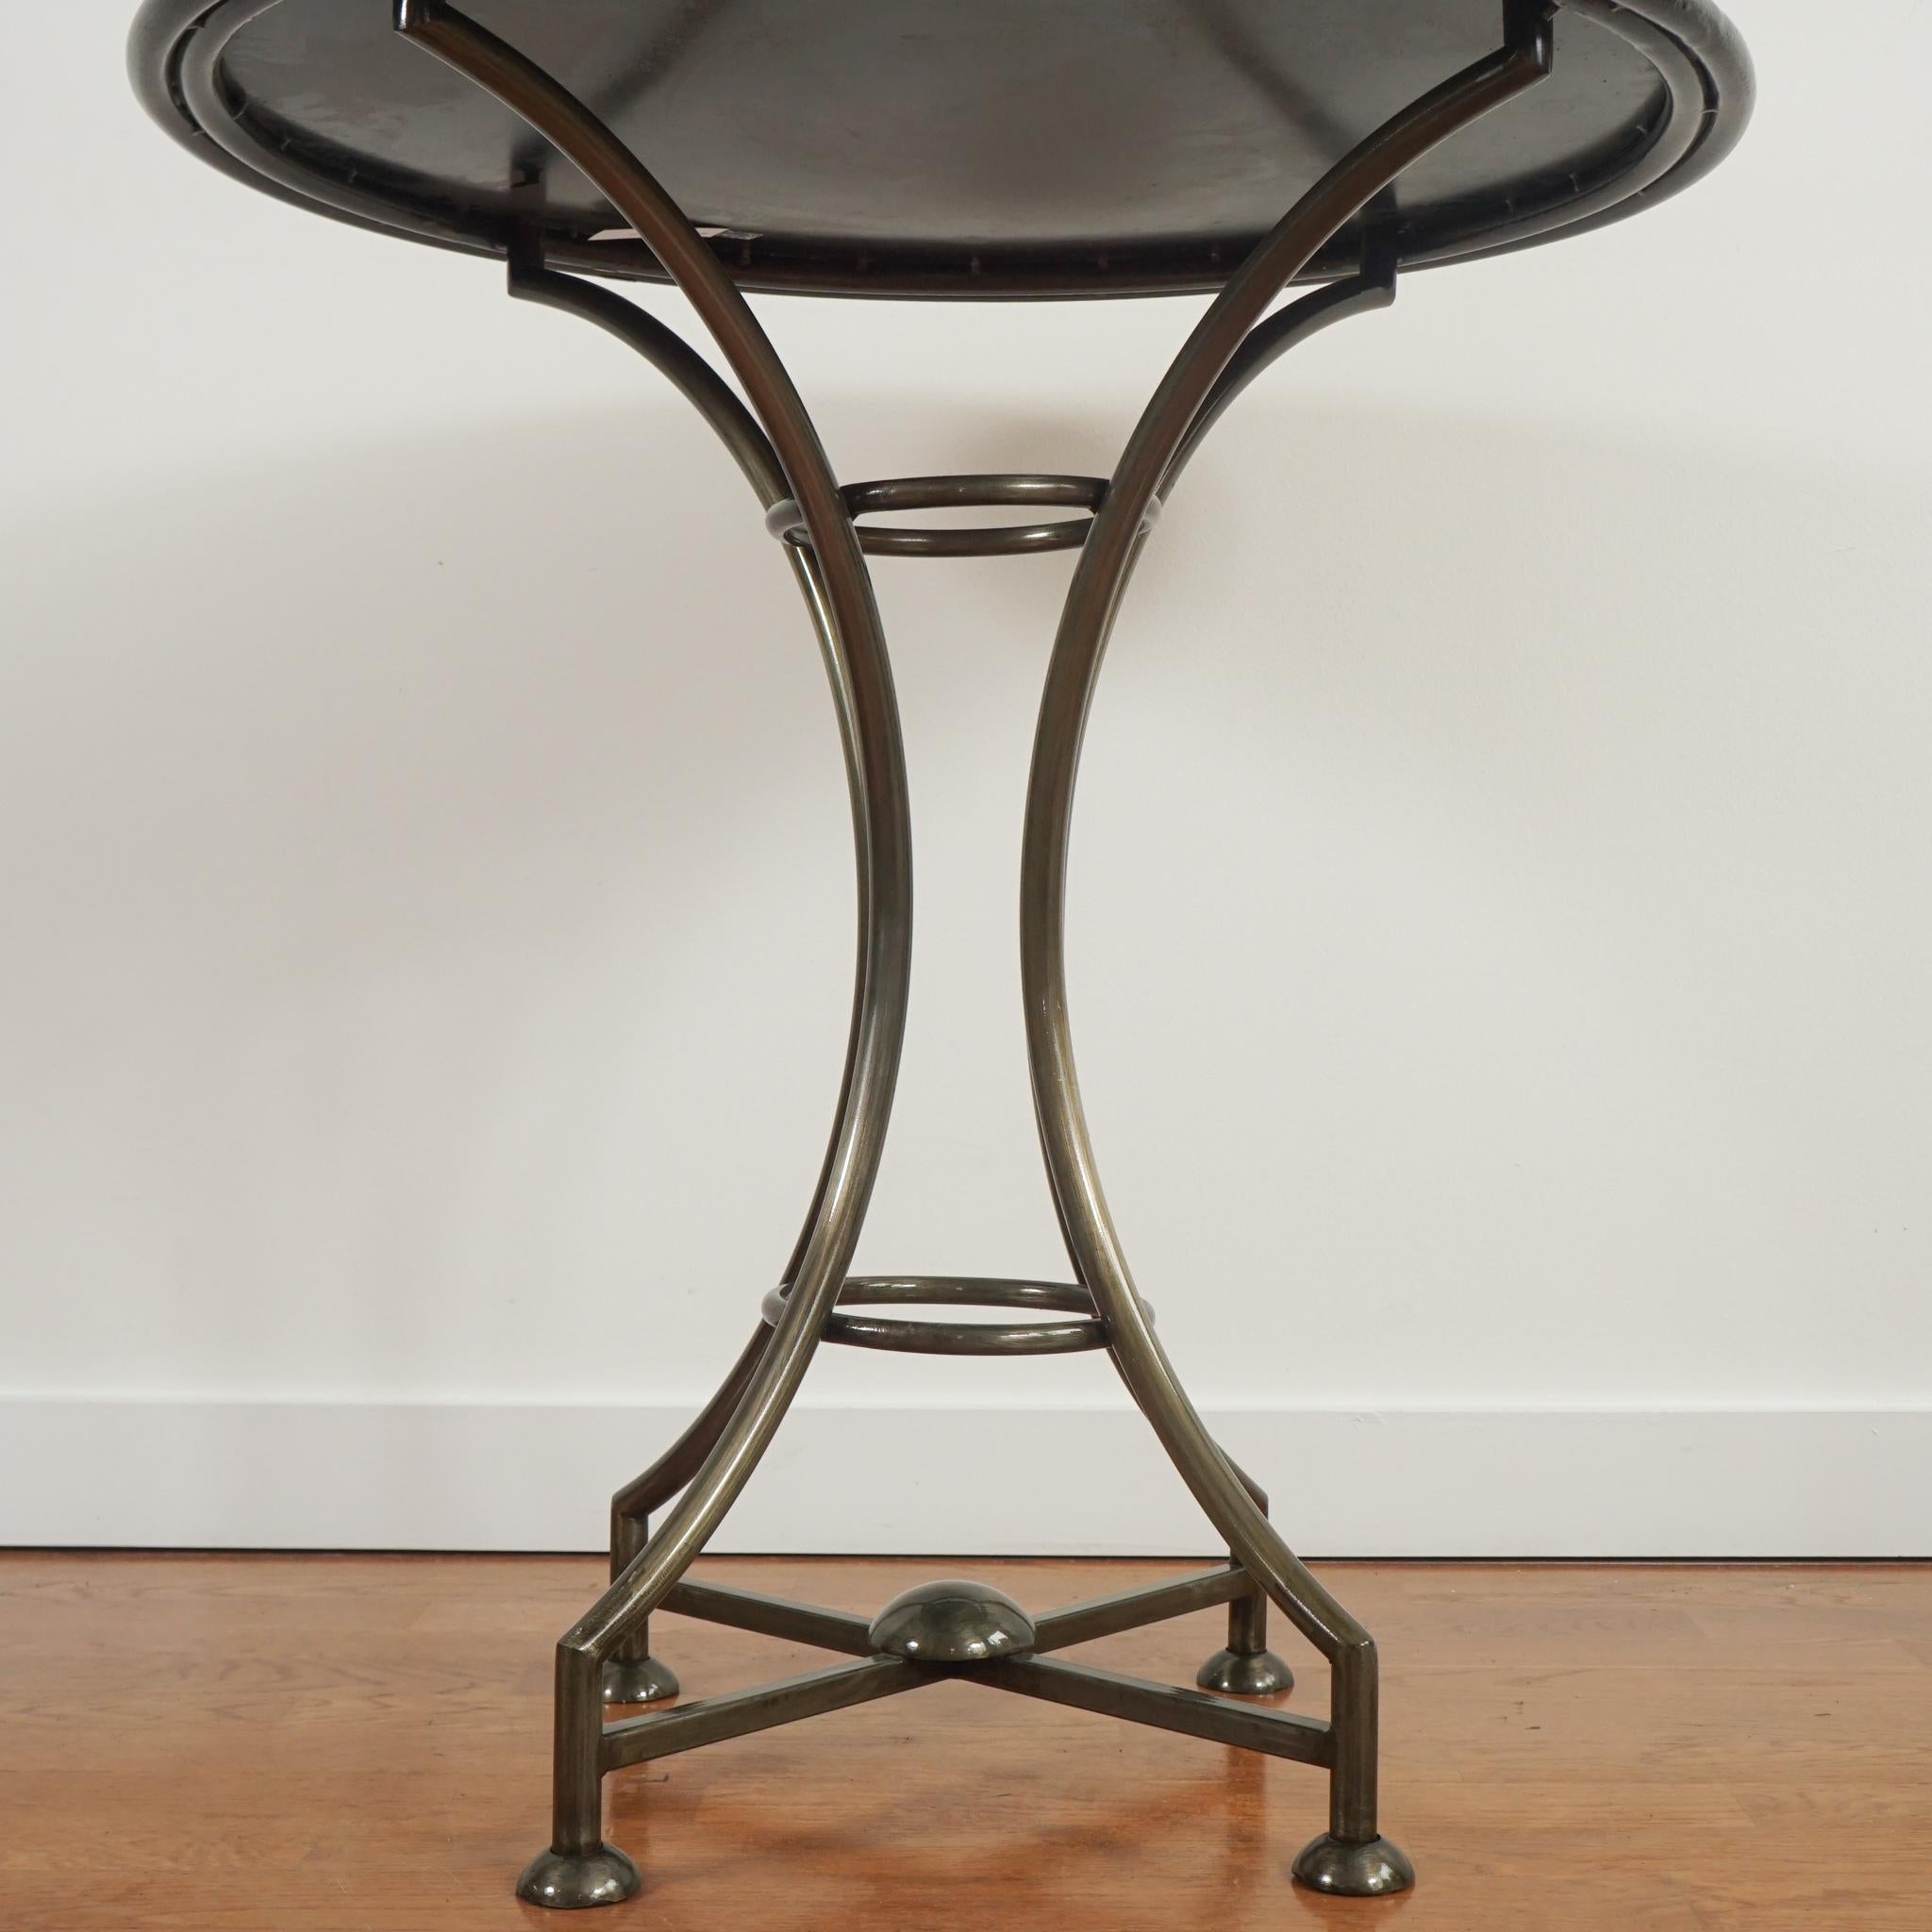 The pair of vintage French gueridon-style iron pedestal base tables, shown here, are distinguished by their faux tortoise ringed surface finish.  Sized for use as end tables or occasional tables, the tables are in very good condition and ready to